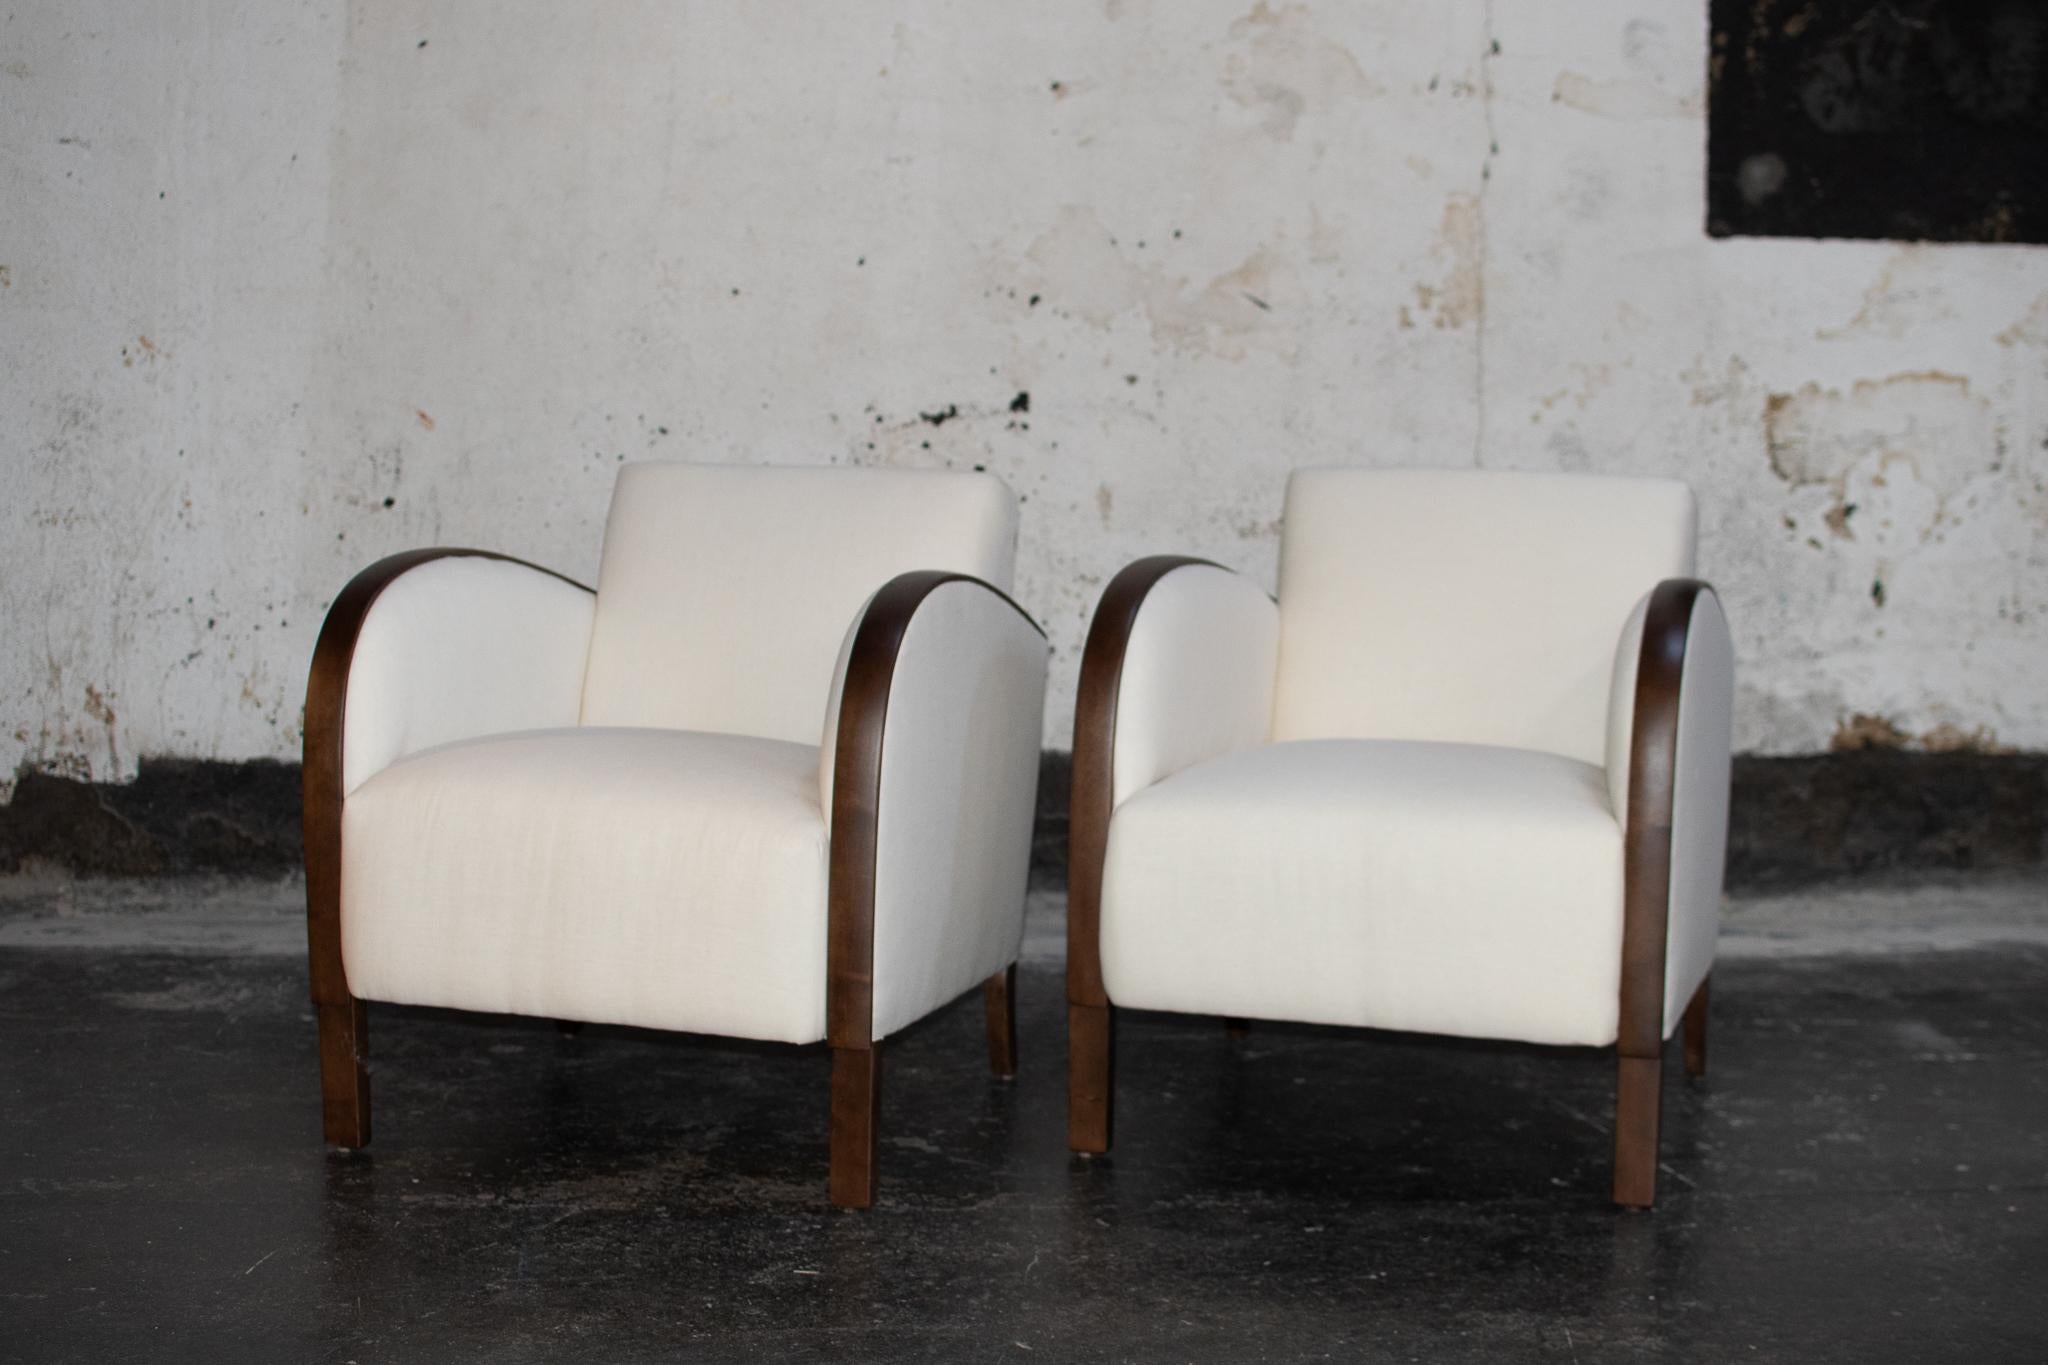 Pair of Swedish Art Deco or Art Moderne club chairs. The petite frame and tub style would fit well in tight spaces. Kalle Anka roughly translates to duck bill, a reference to the duck bill silhouette of the chair and featured in the Donald Duck